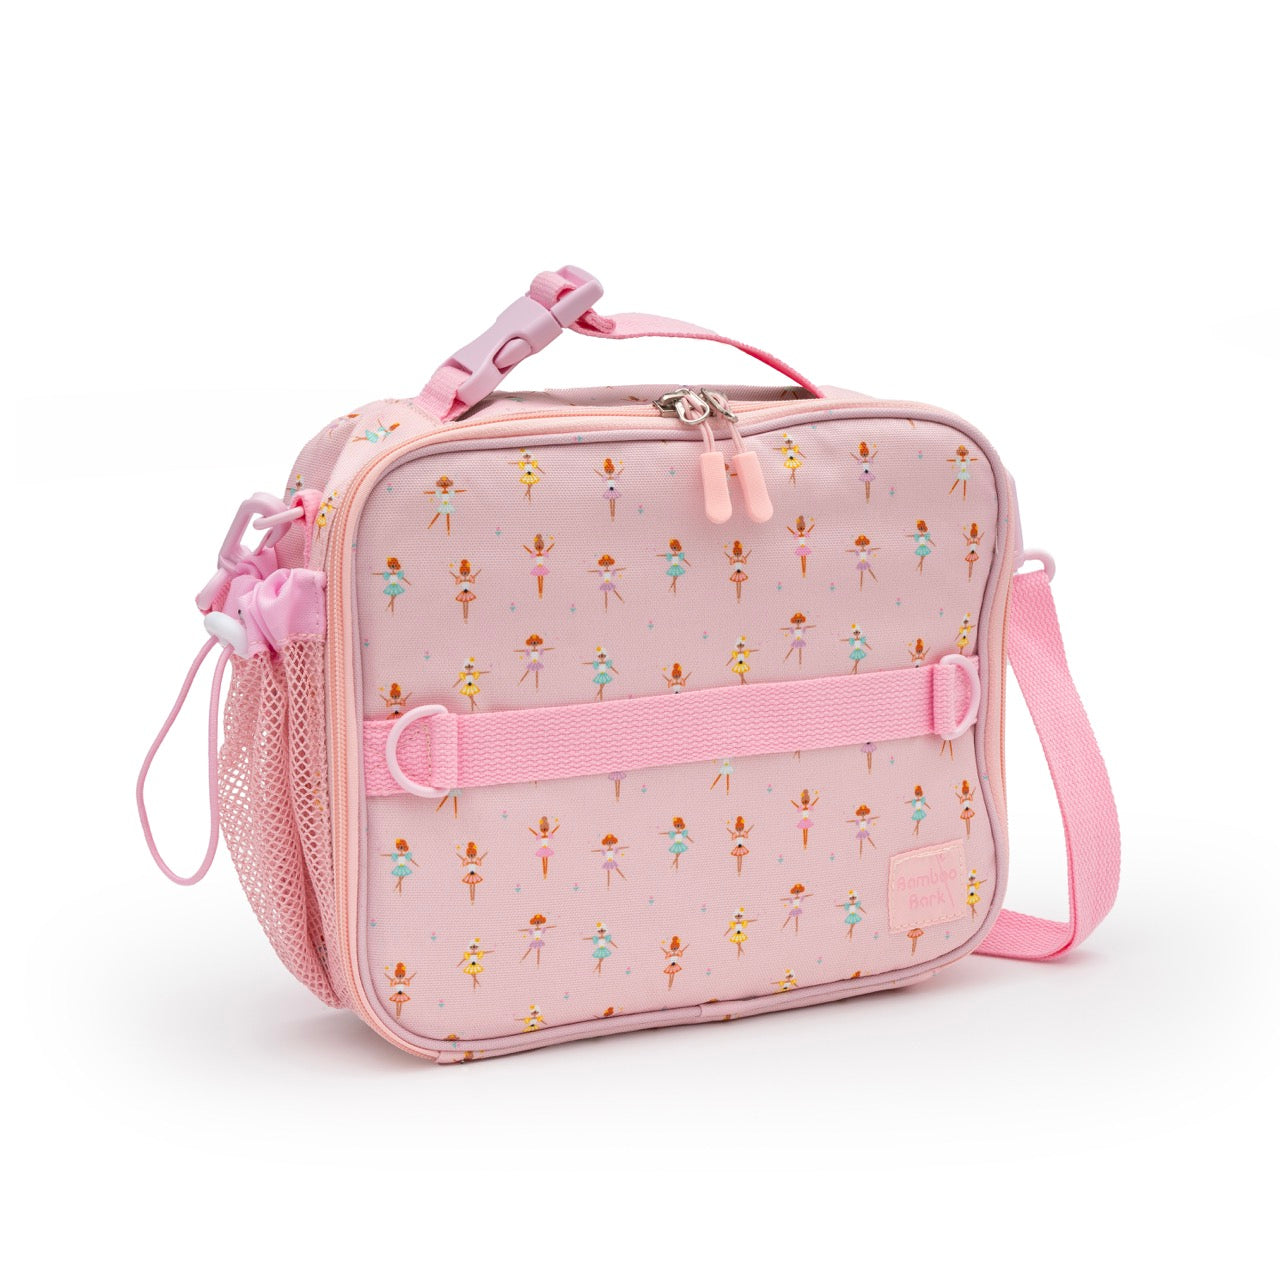 Bamboo Bark Ballerina print insulated Lunch Bag with 3 carrying options